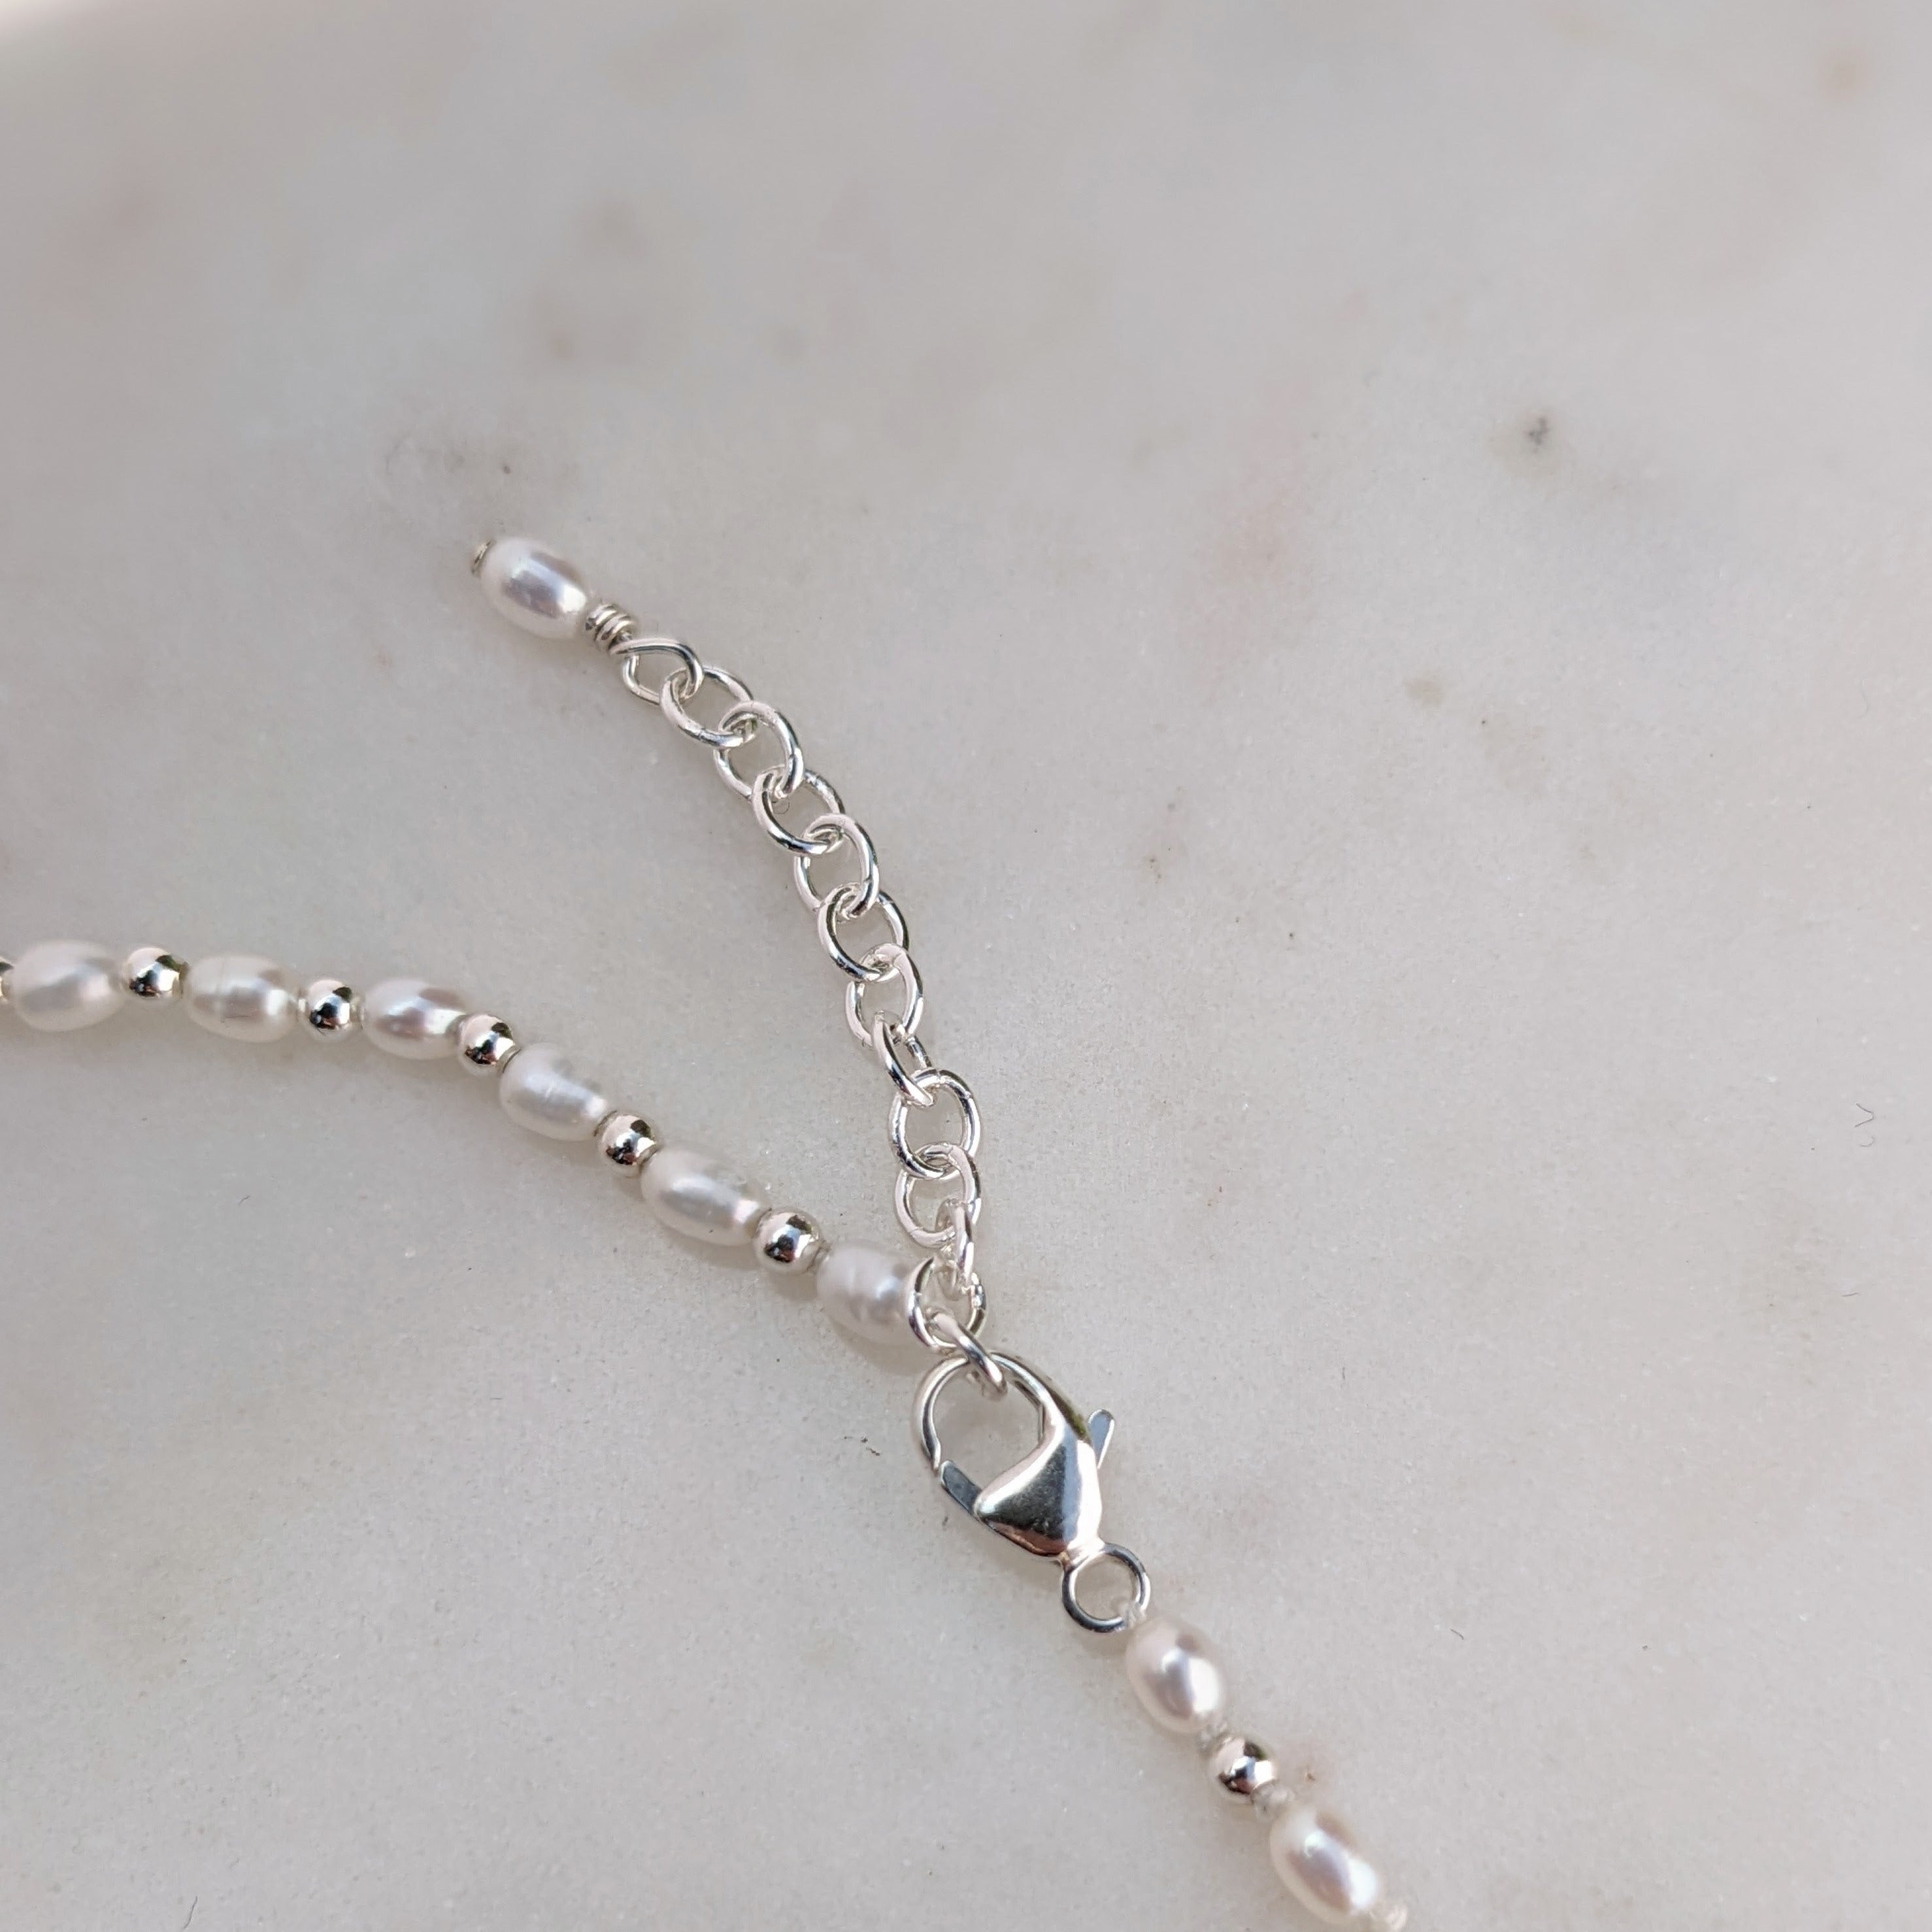 Mini seed and sterling silver bead anklet with adjustable chain clasp